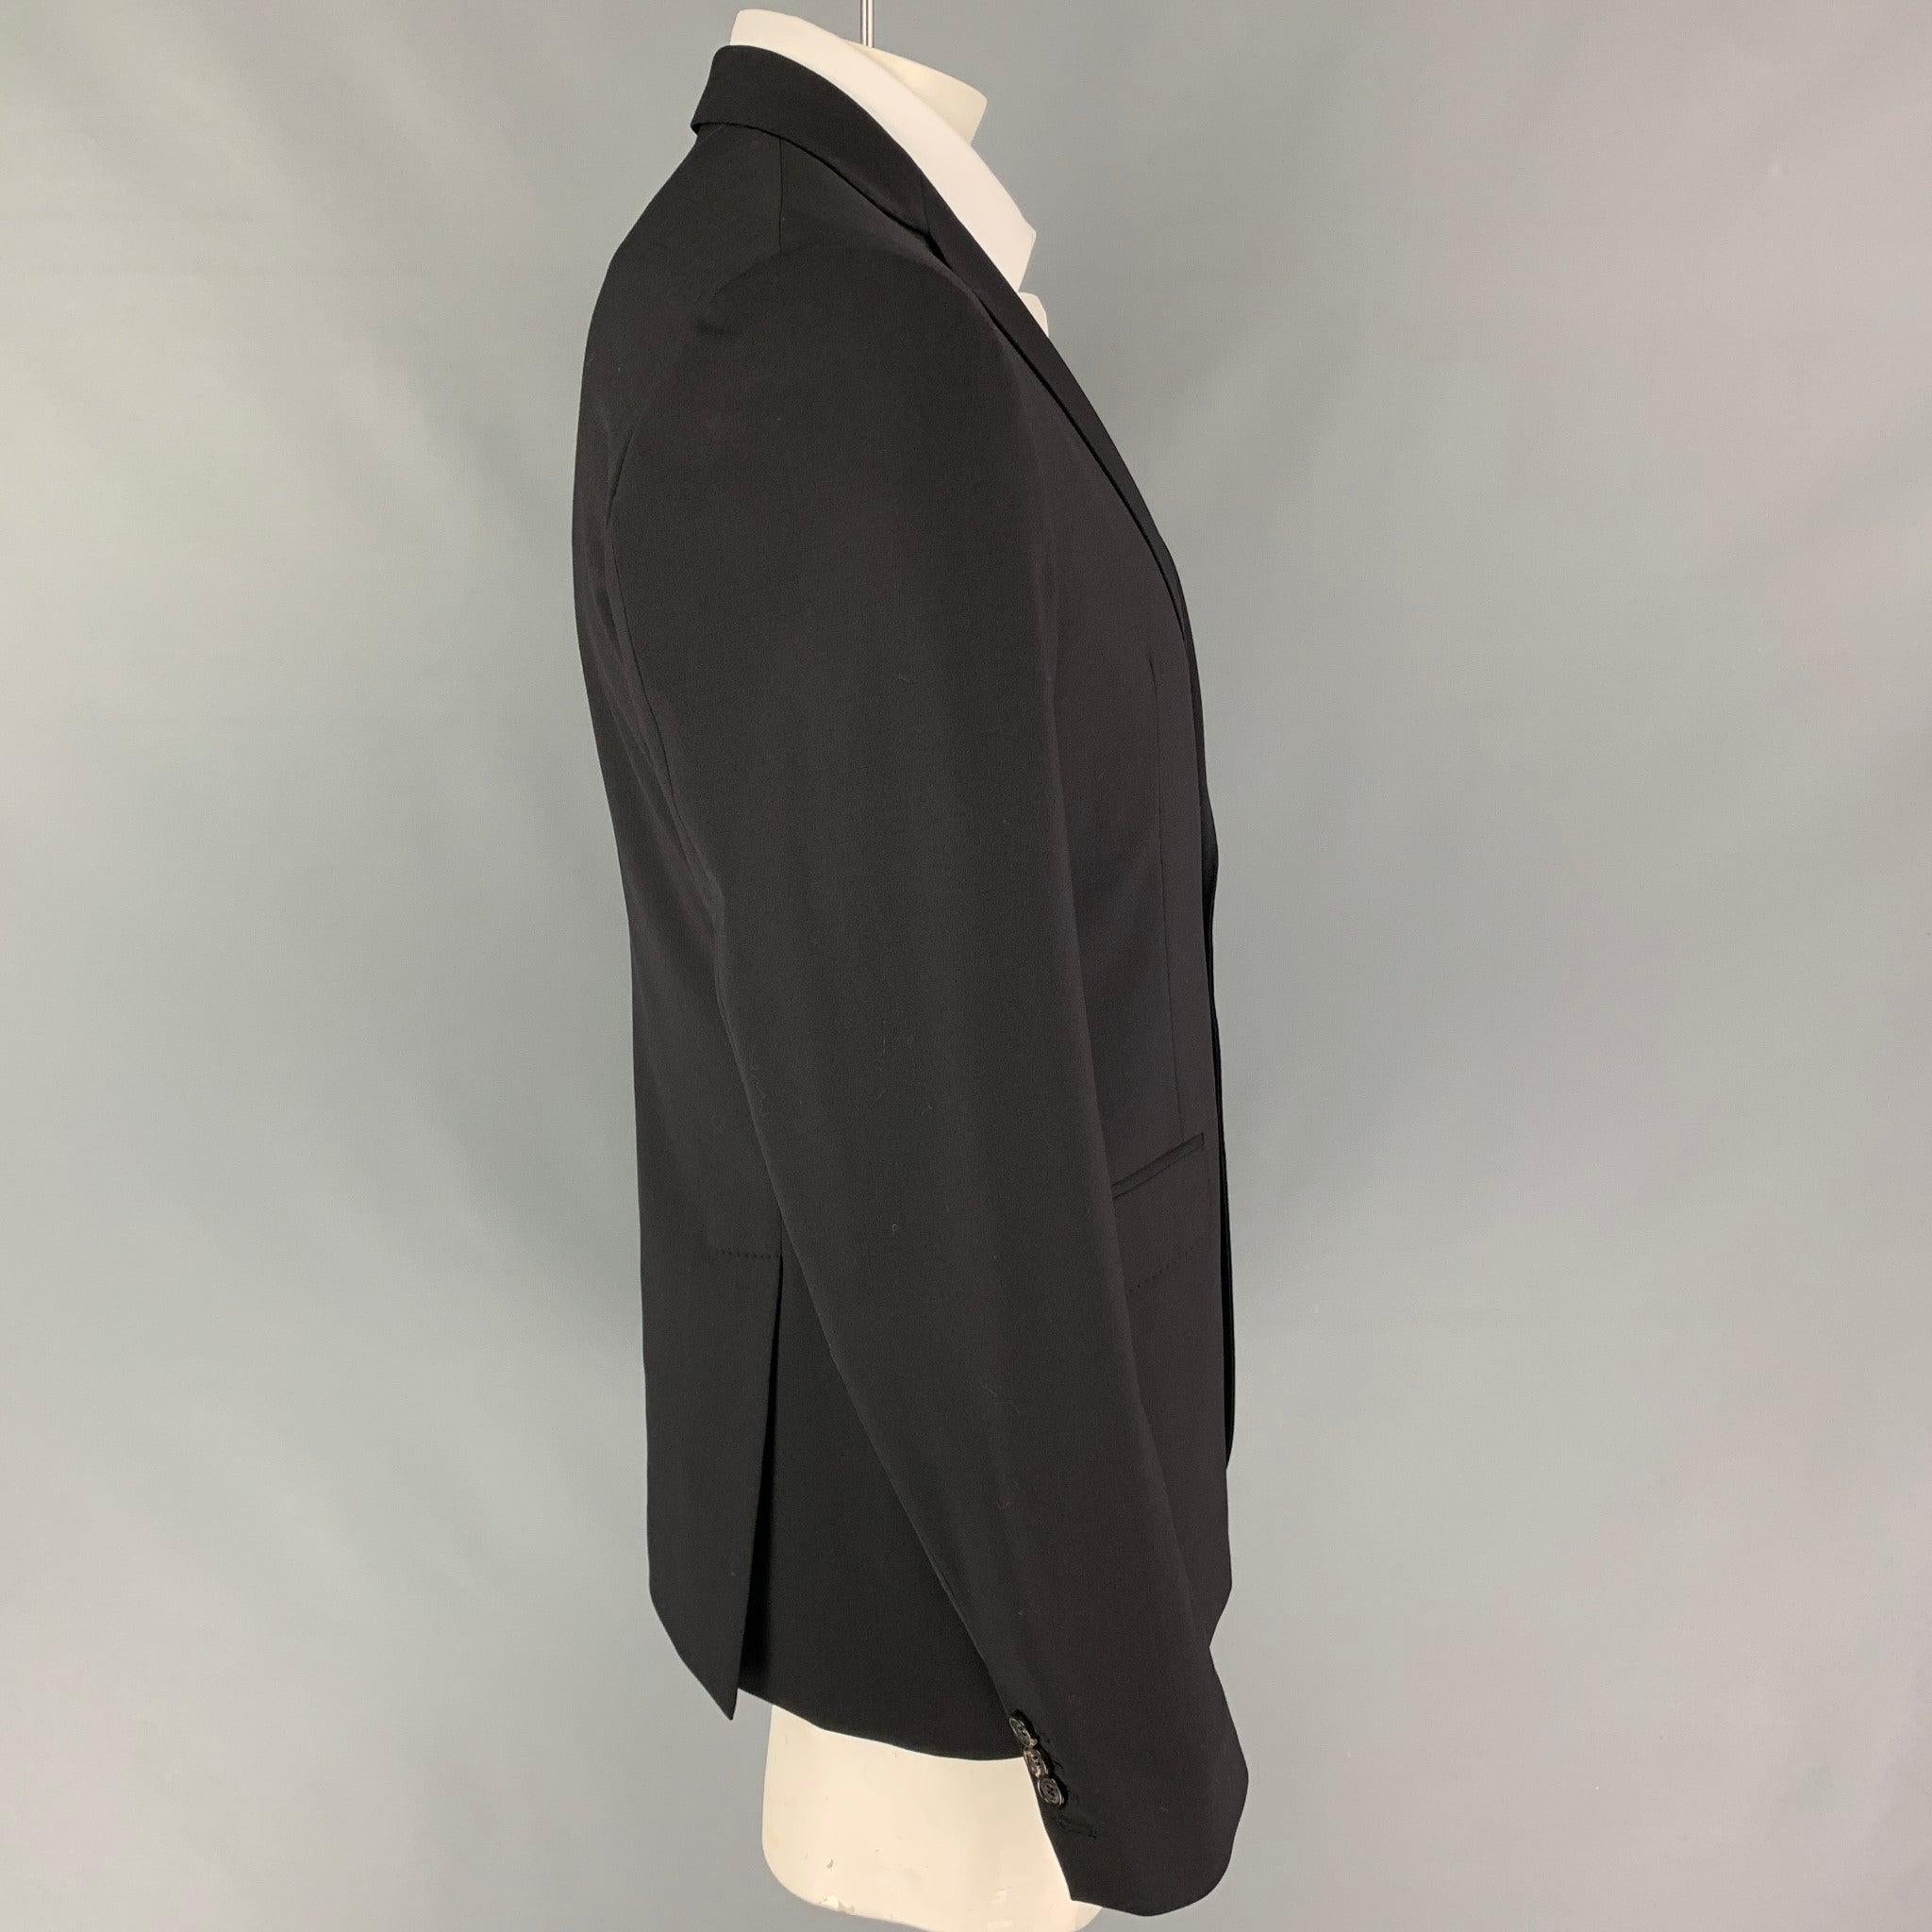 DSQUARED2 sport coat comes in a black wool with a full liner featuring a notch lapel, flap pockets, double back vent, and a double button closure. Made in Italy.
Very Good
Pre-Owned Condition. 

Marked:   54 

Measurements: 
 
Shoulder: 18.5 inches 